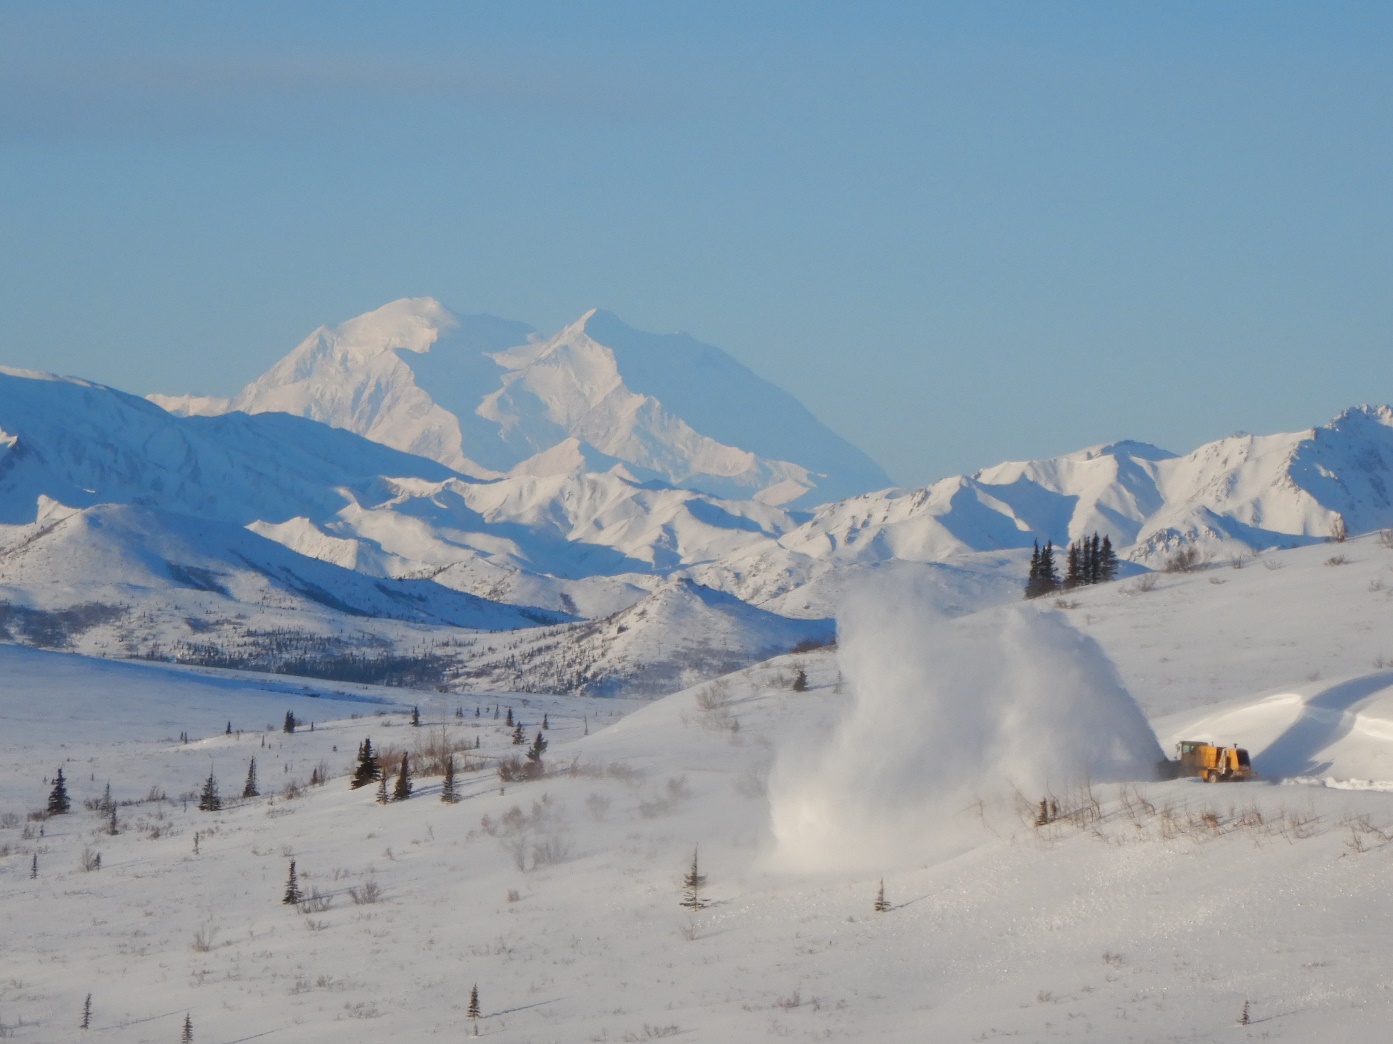 A wintry landscape on a sunny day with Denali looming large on the horizon. In the corner, a large orange snowblower clears the road and sends a large cloud of snow up into the air off to the side of the road.